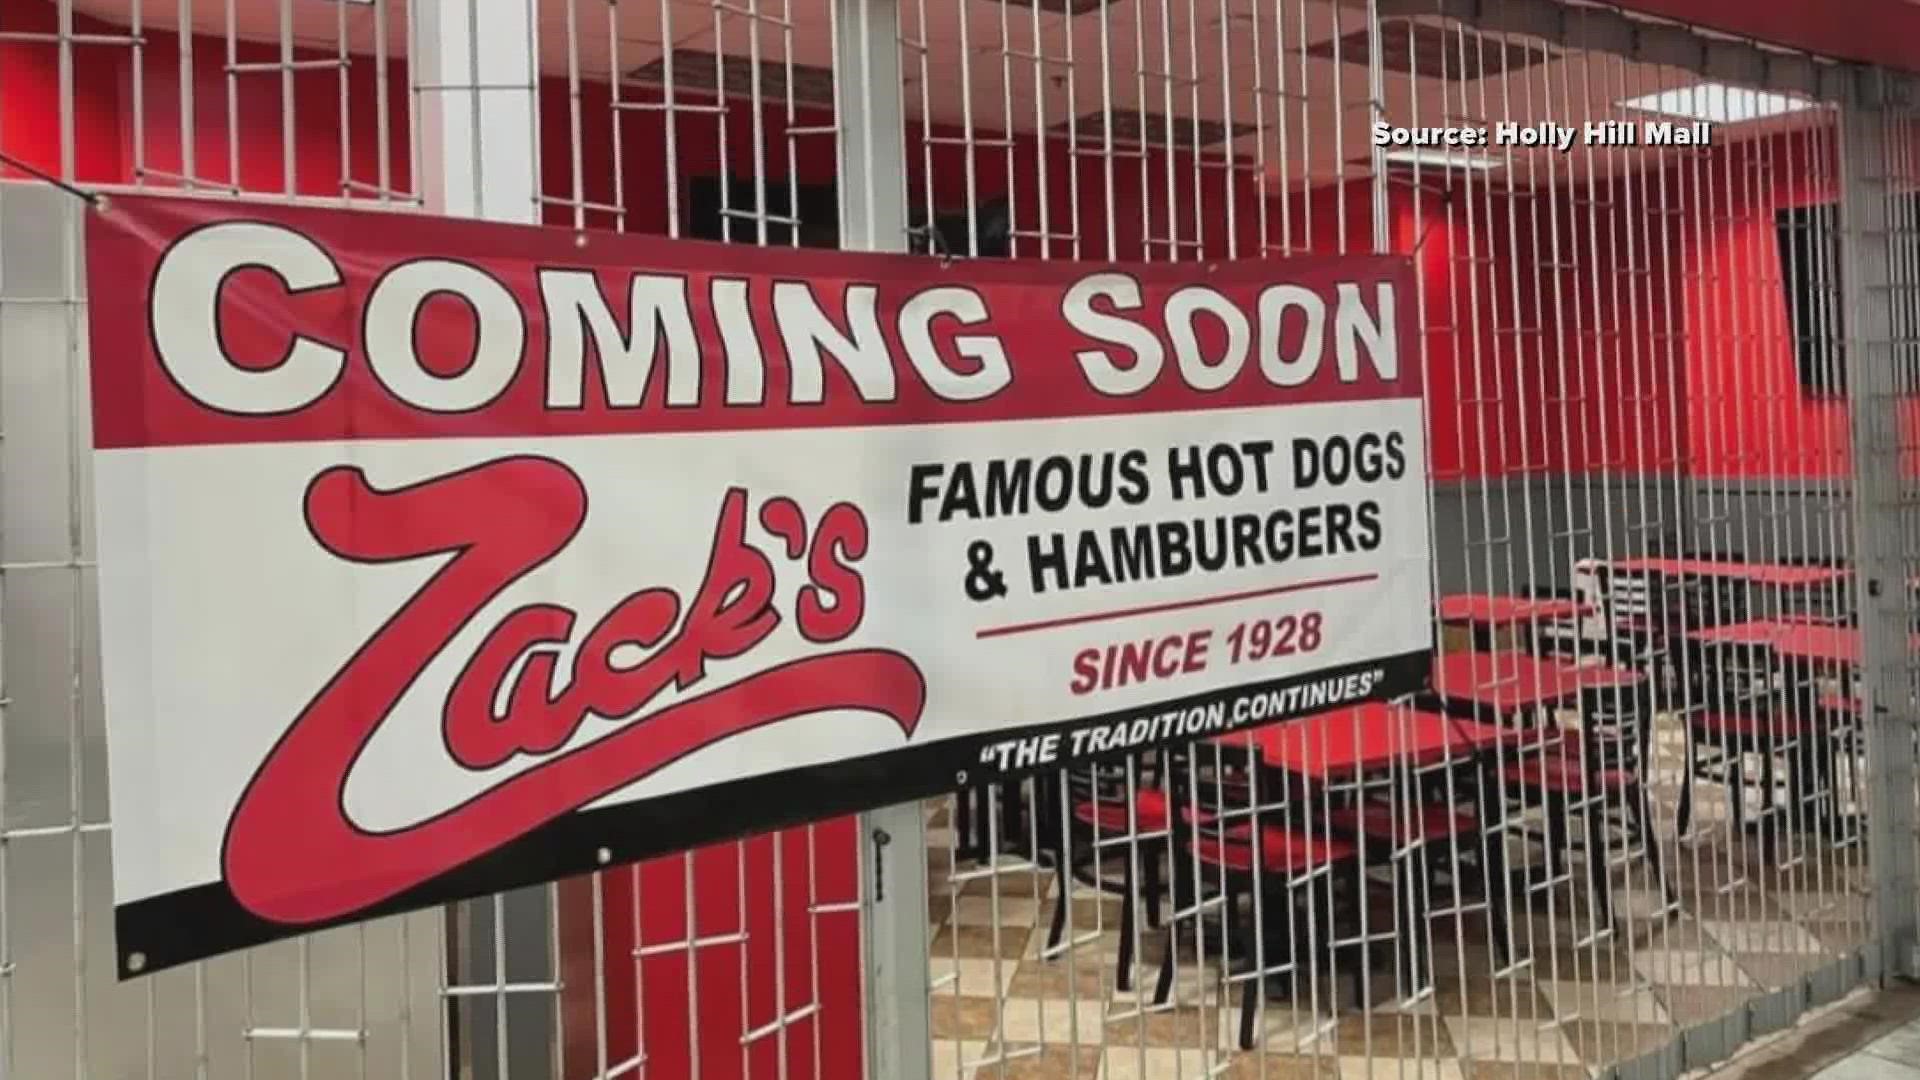 Zack's recently came under new ownership. The group will open a spot in the mall by the end of 2022.